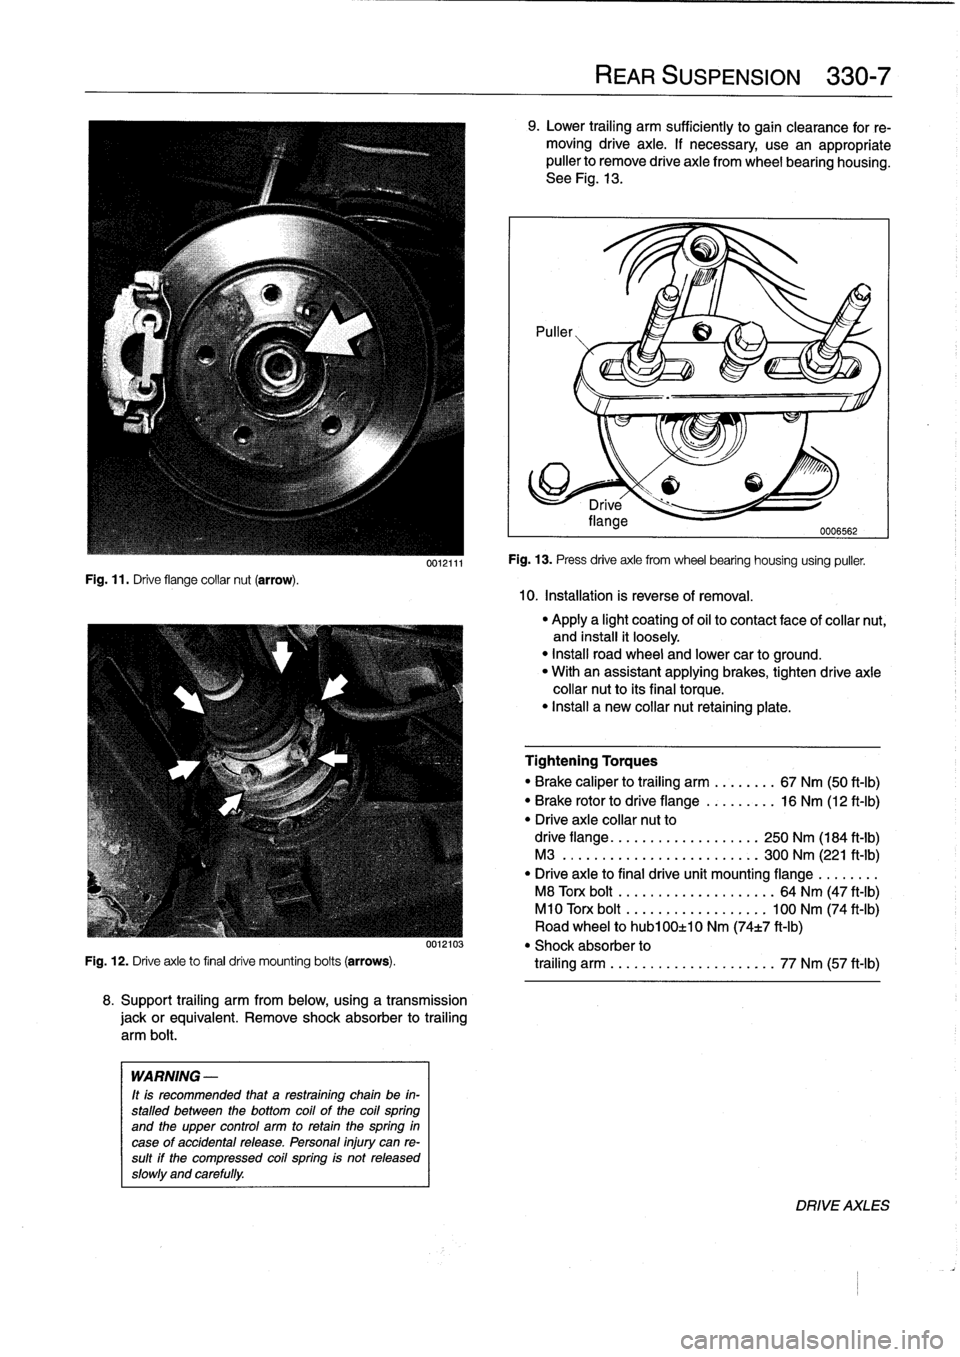 BMW 328i 1993 E36 Service Manual 
Fig
.
11
.
Drive
flange
collar
nut
(arrow)
.

0012111

8
.
Support
trailing
arm
from
below,
using
a
transmission

jackorequivalent
.
Remove
shock
absorber
to
trailing

arm
bolt
.

WARNING
-

It
is
re